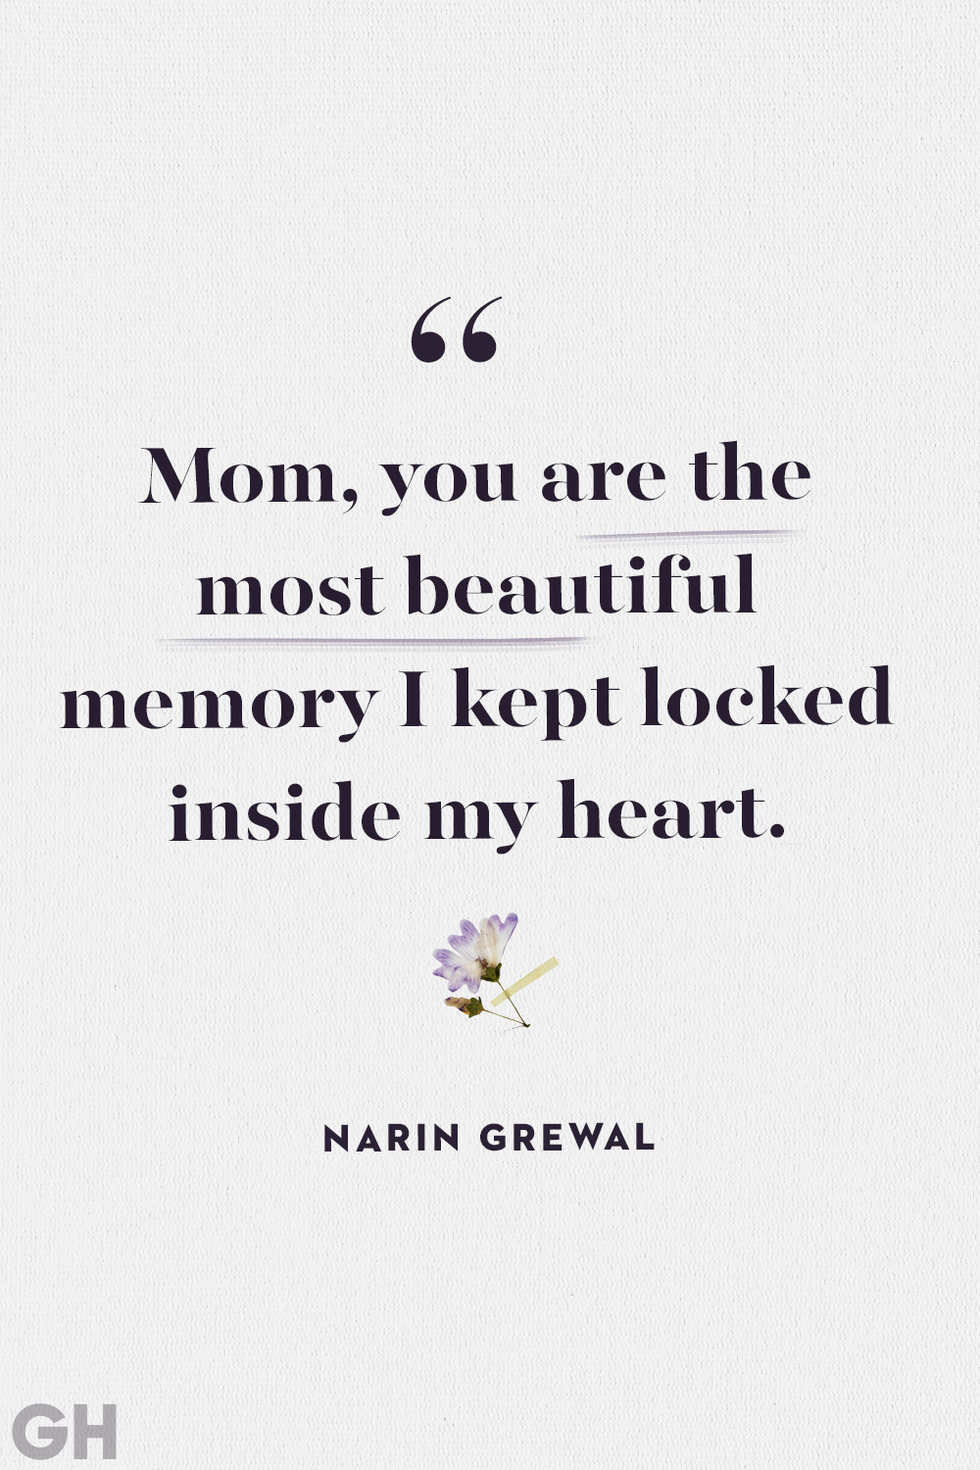 mom you are the most beautiful memory i kept locked inside my heart